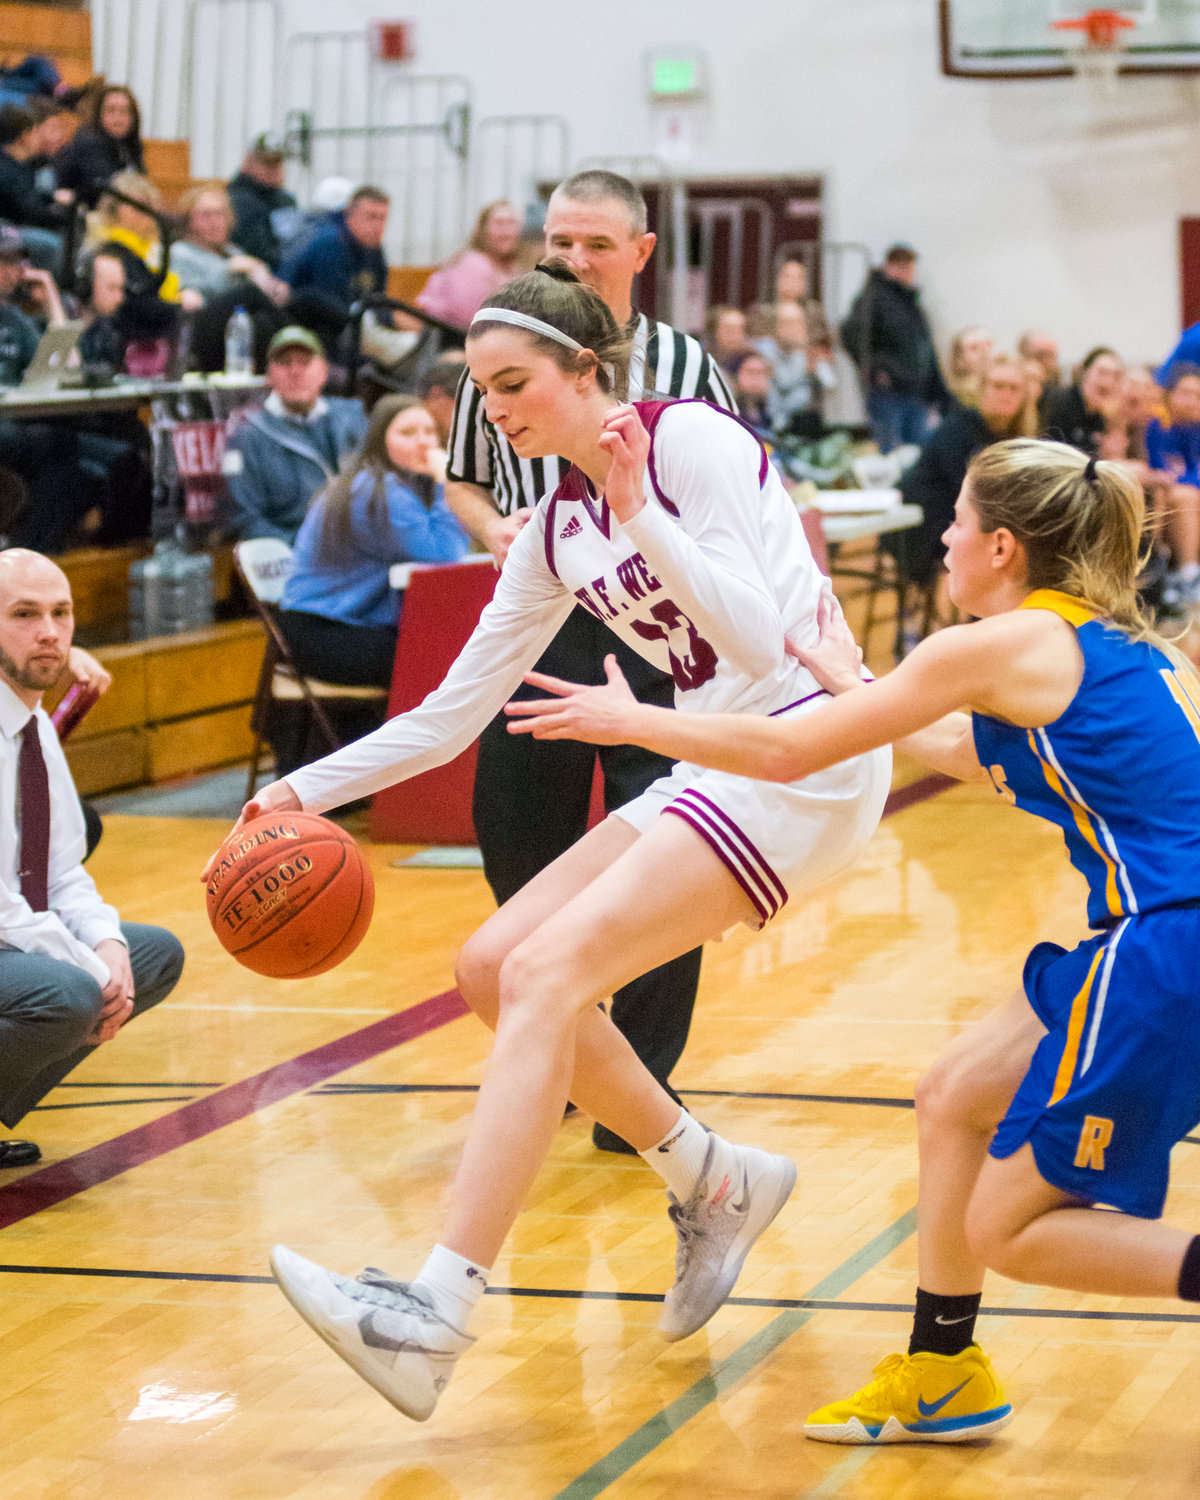 Images from an Evergreen 2A girls basketball game between W.F. West and Rochester played Tuesday night in Chehalis.